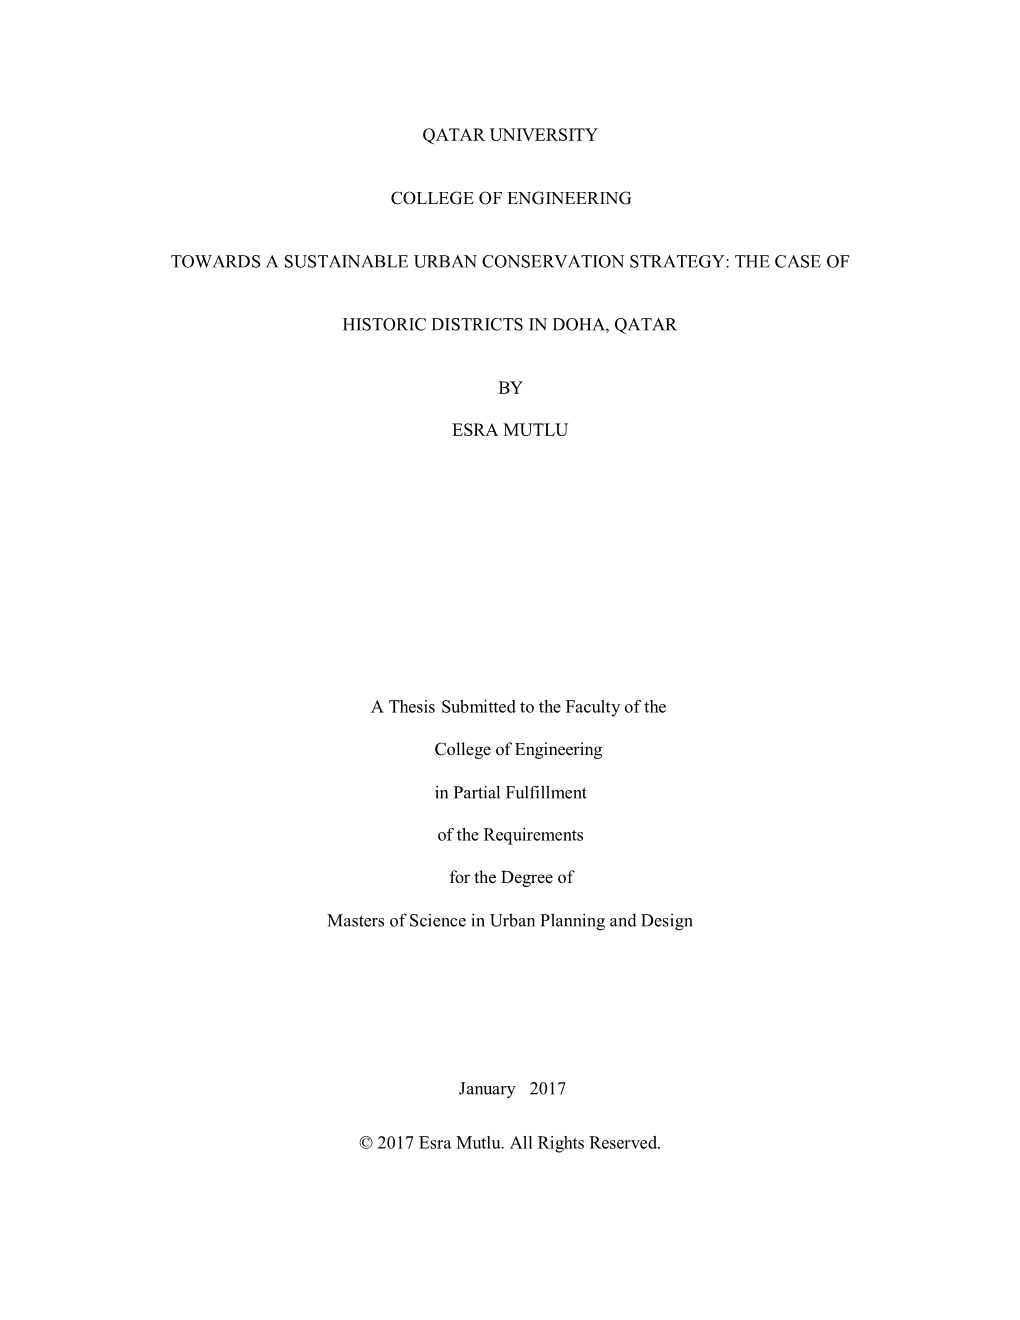 Thesis-Master of Science (4.641Mb)